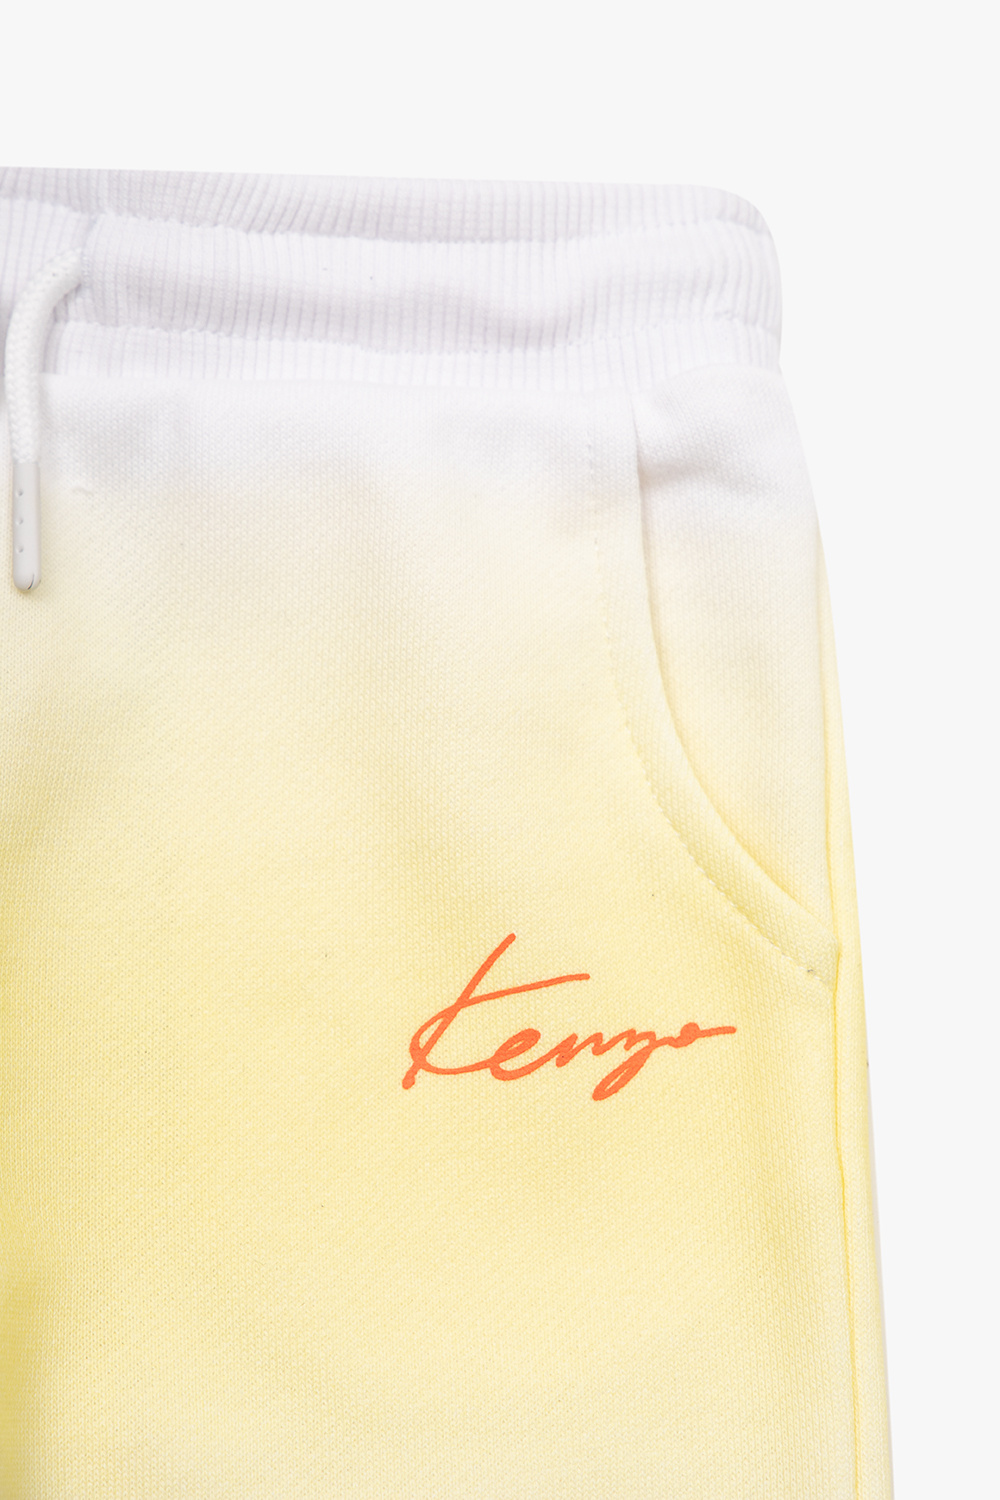 Kenzo Kids ribbed plunge front top with belt and leggings set in camel